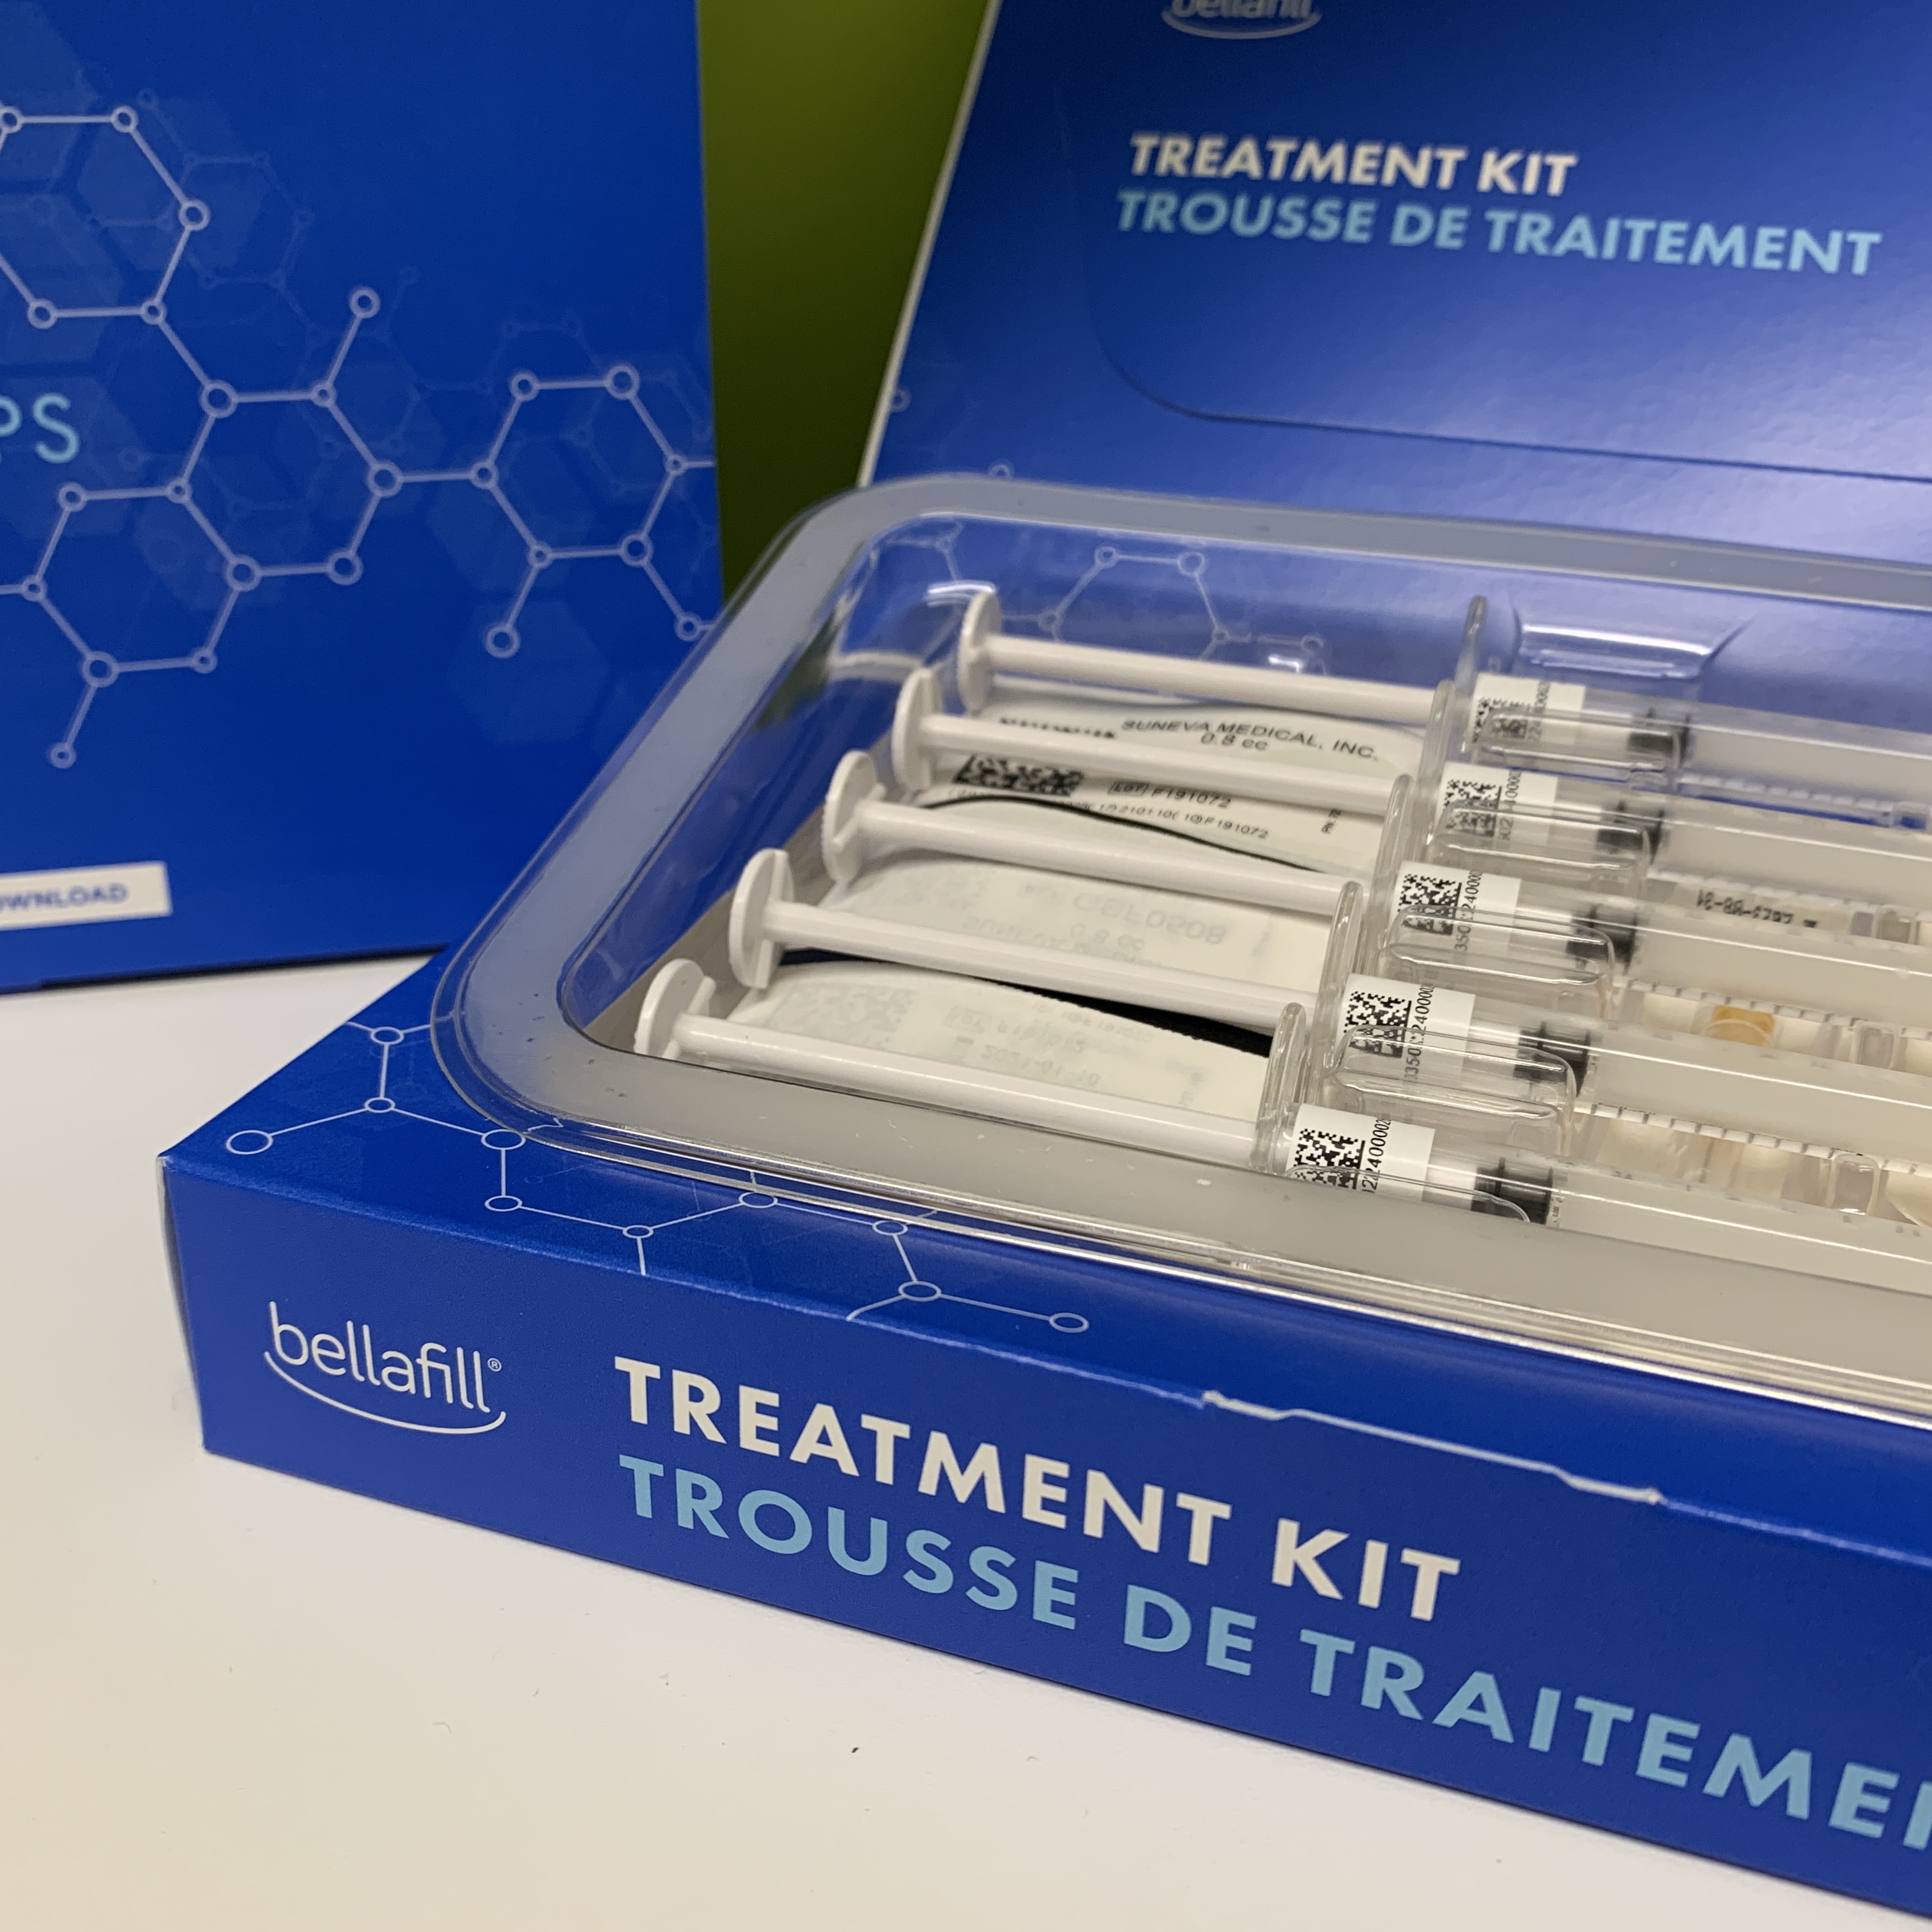 Bellafill treatment kit is available in Seattle at Well Medical Arts